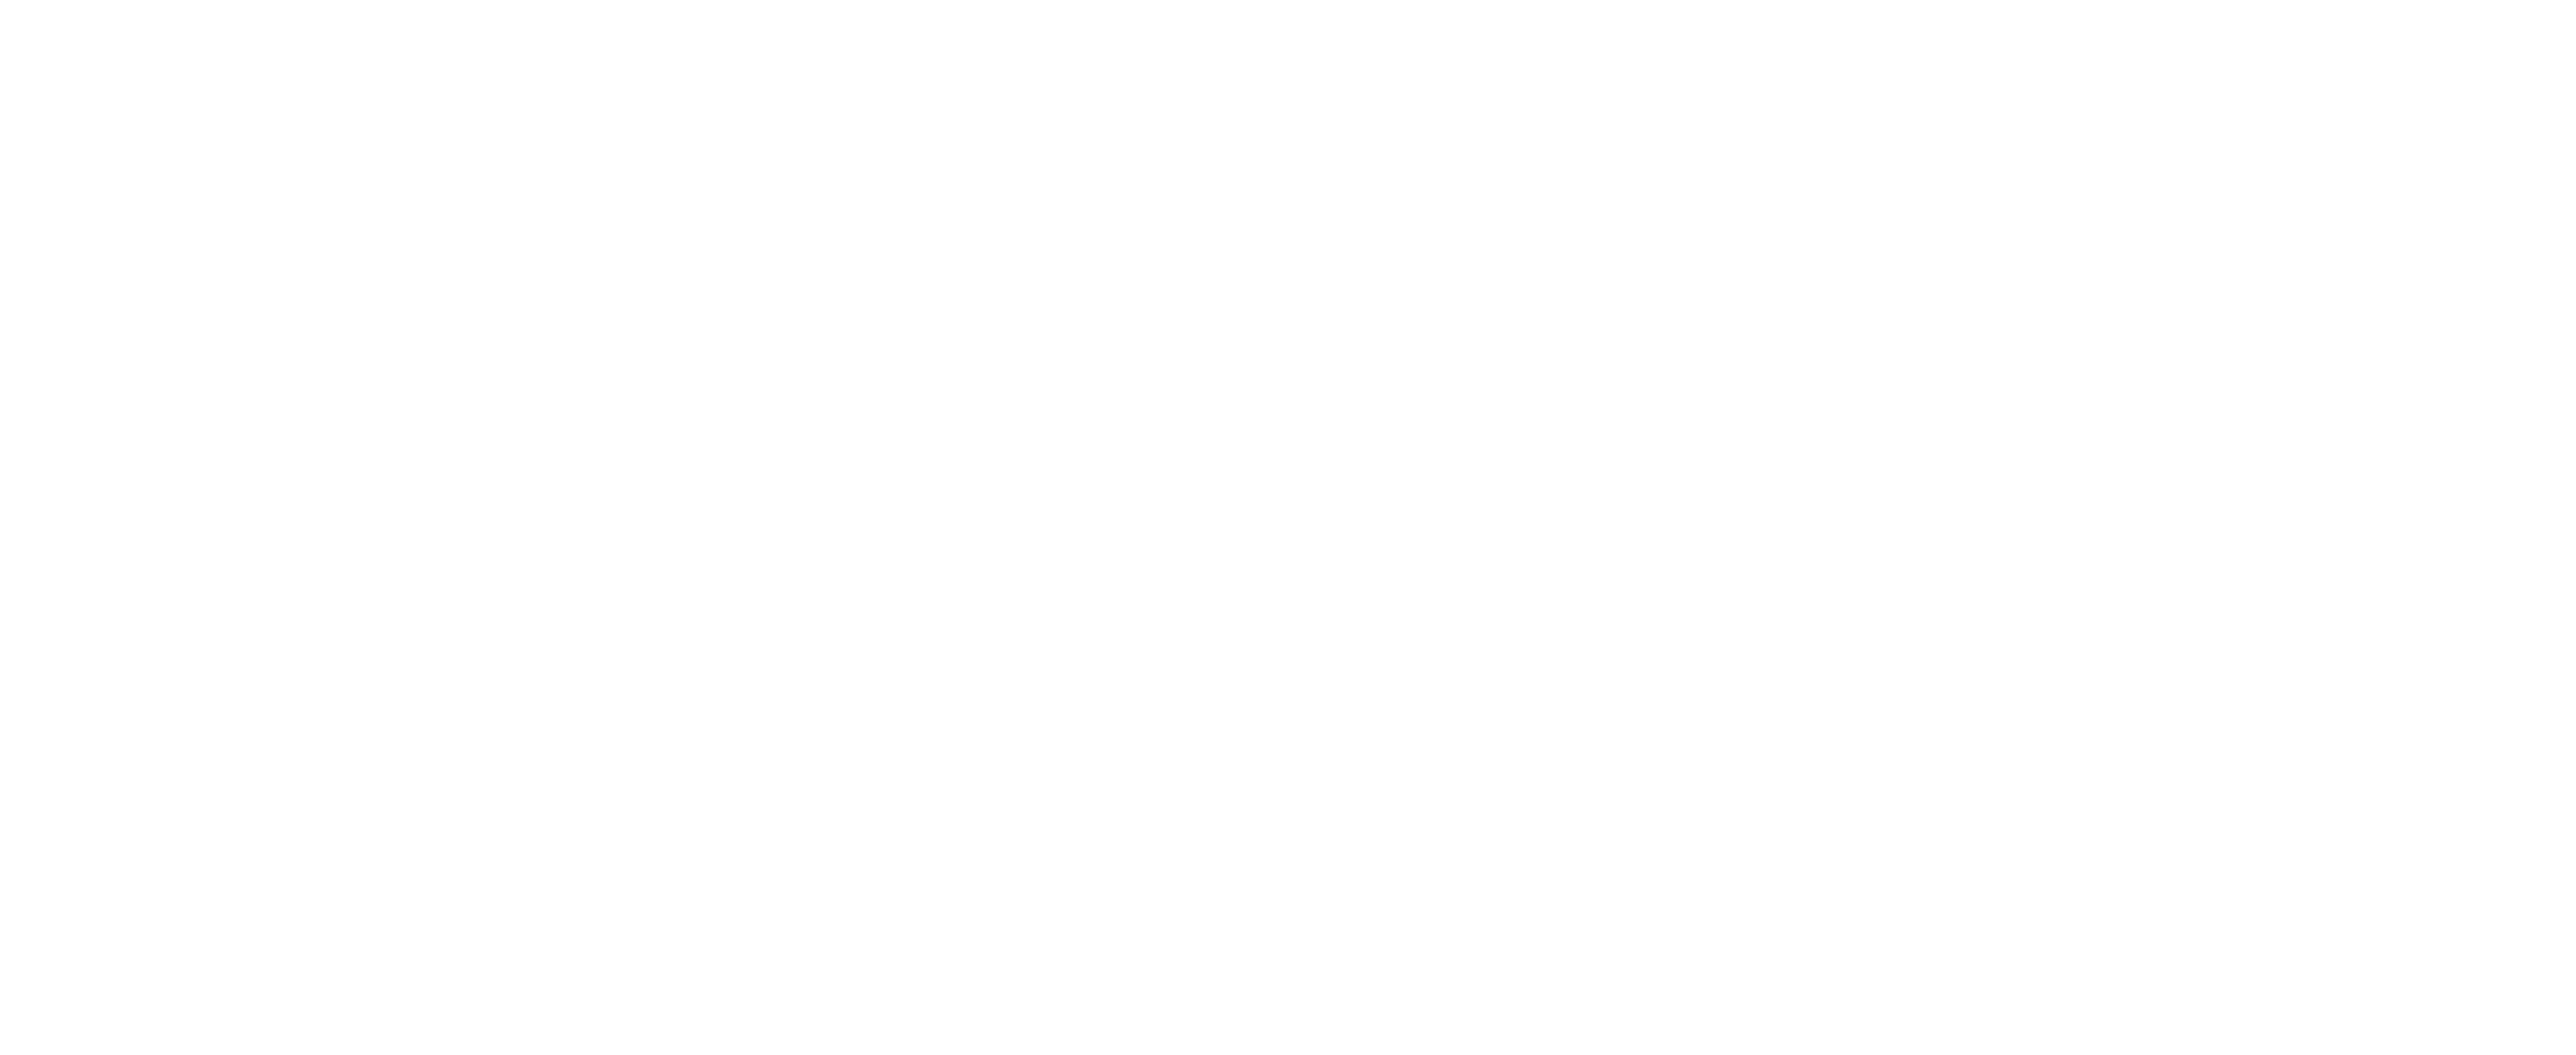 Startup Lithuania